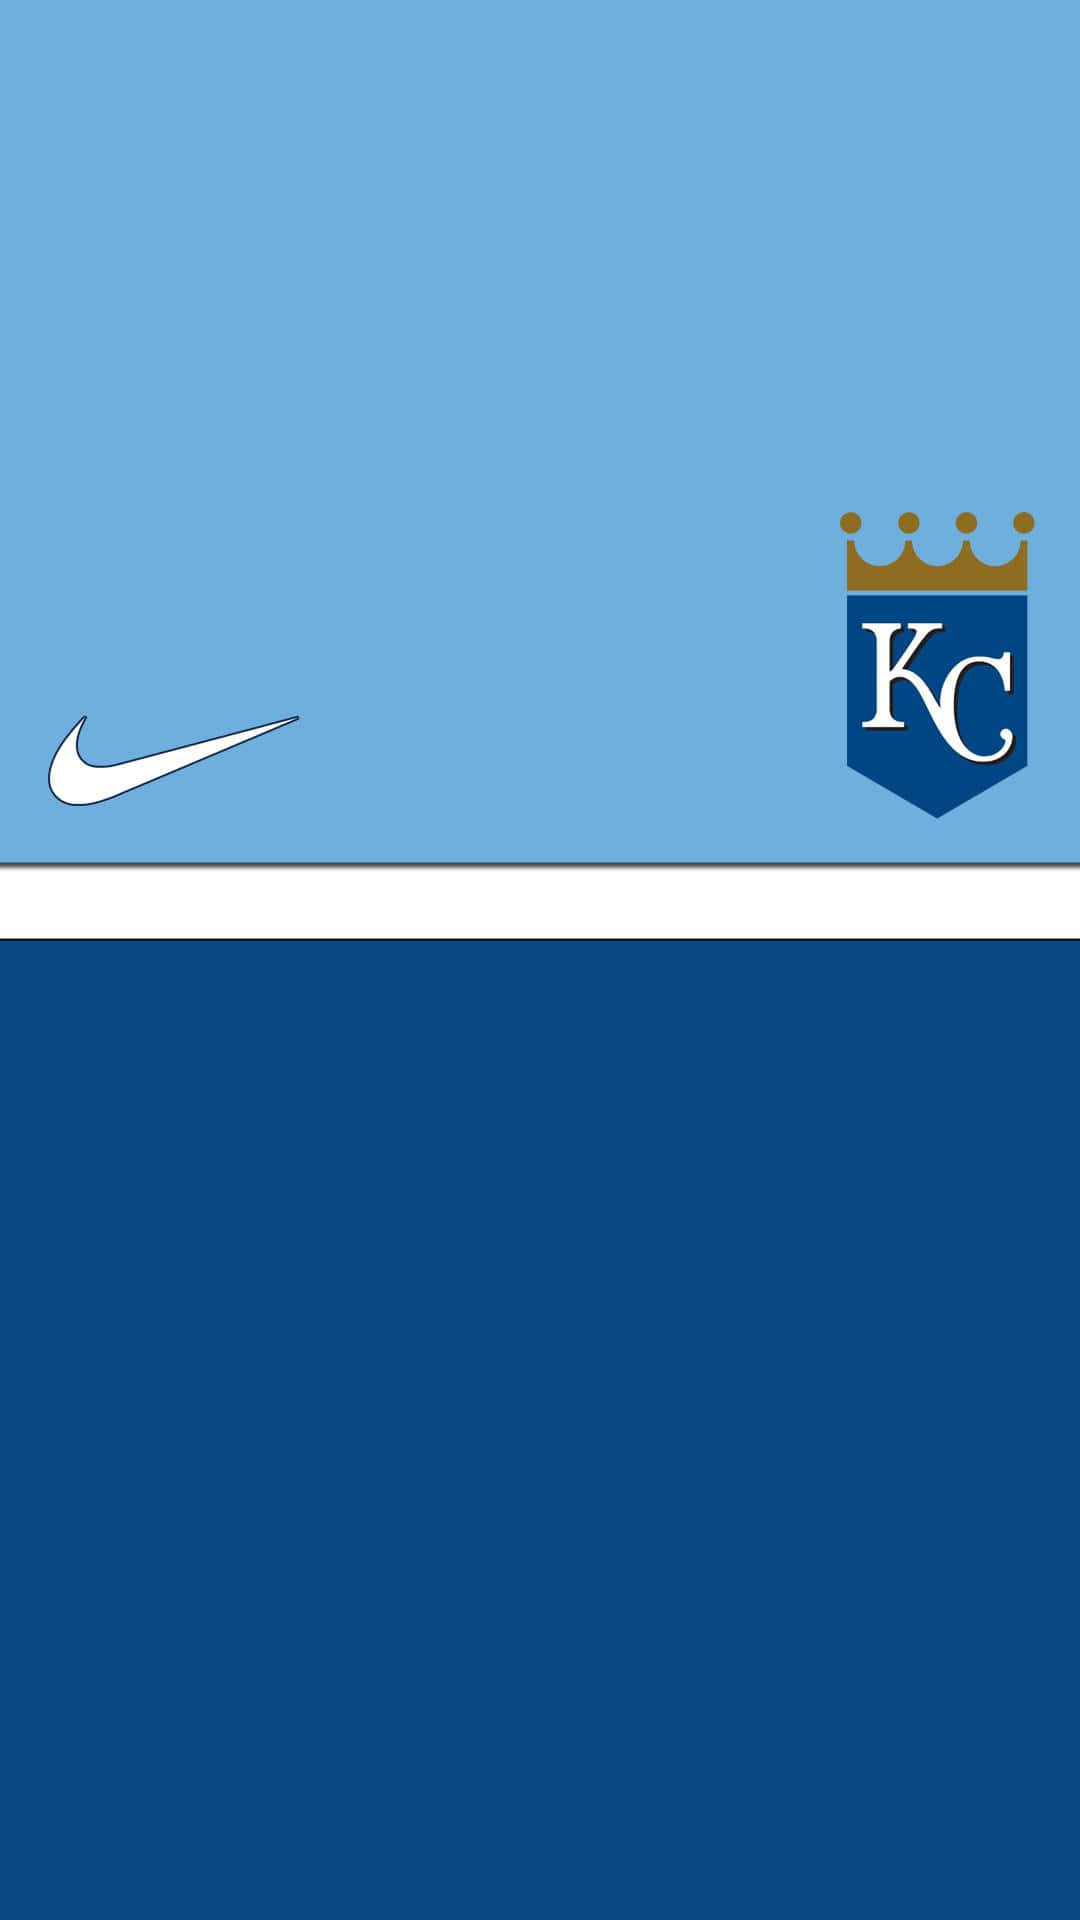 The Exciting Fans of the Kansas City Royals Wallpaper